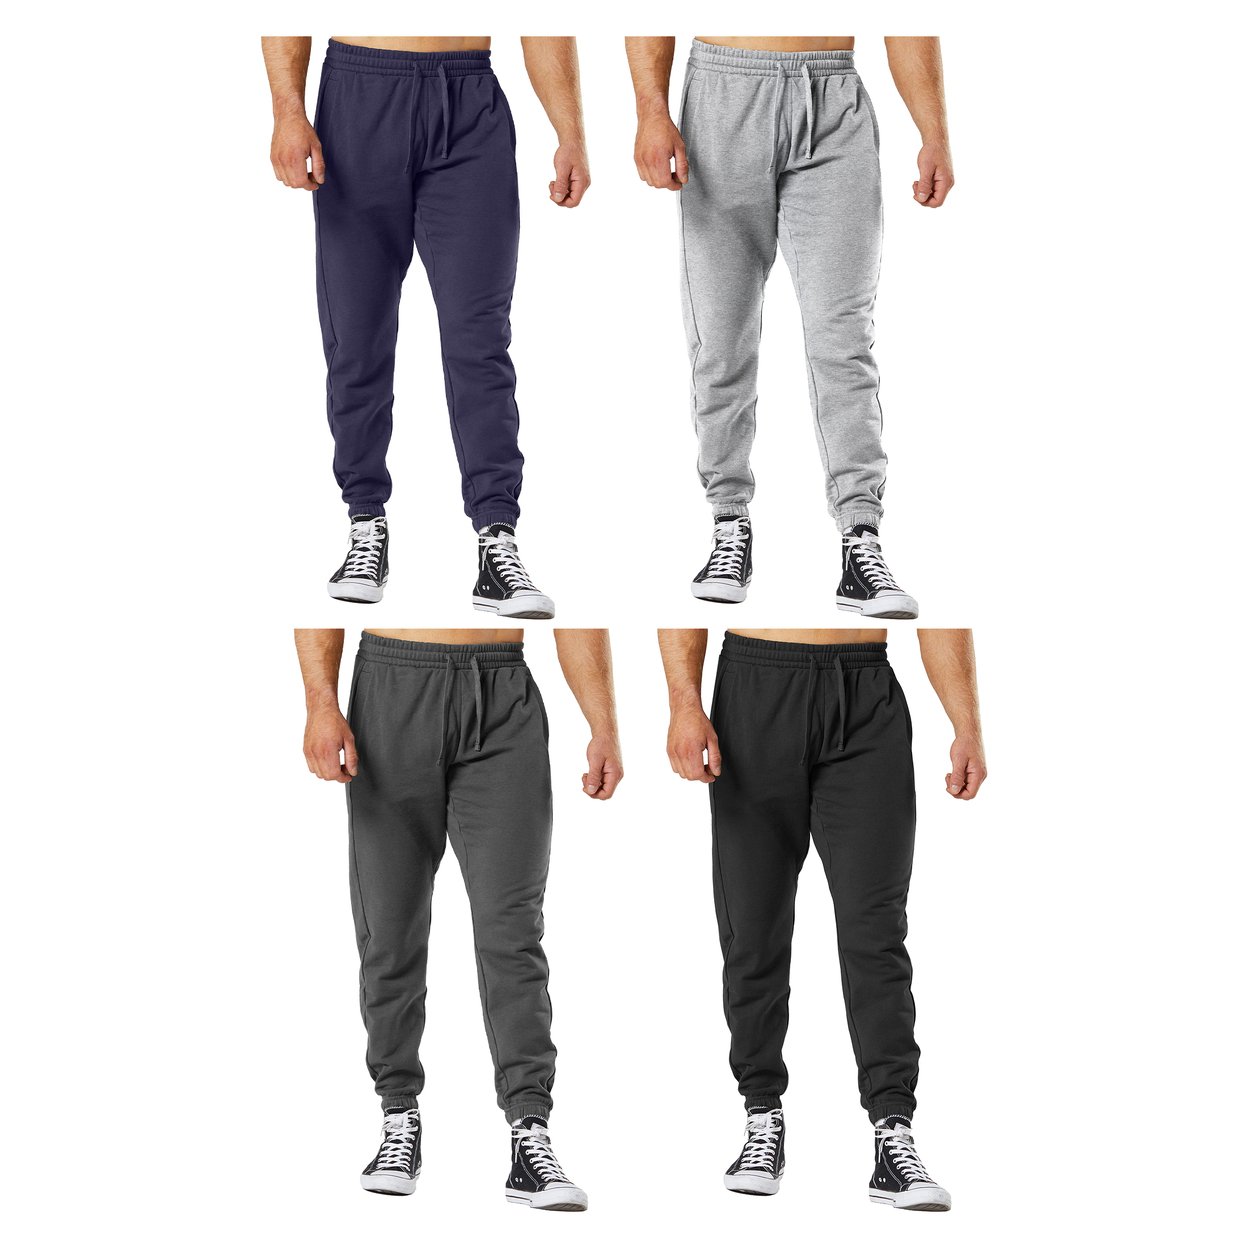 2-Pack: Men's Ultra-Soft Cozy Winter Warm Casual Fleece-Lined Sweatpants Jogger - Black & Charcoal, Small